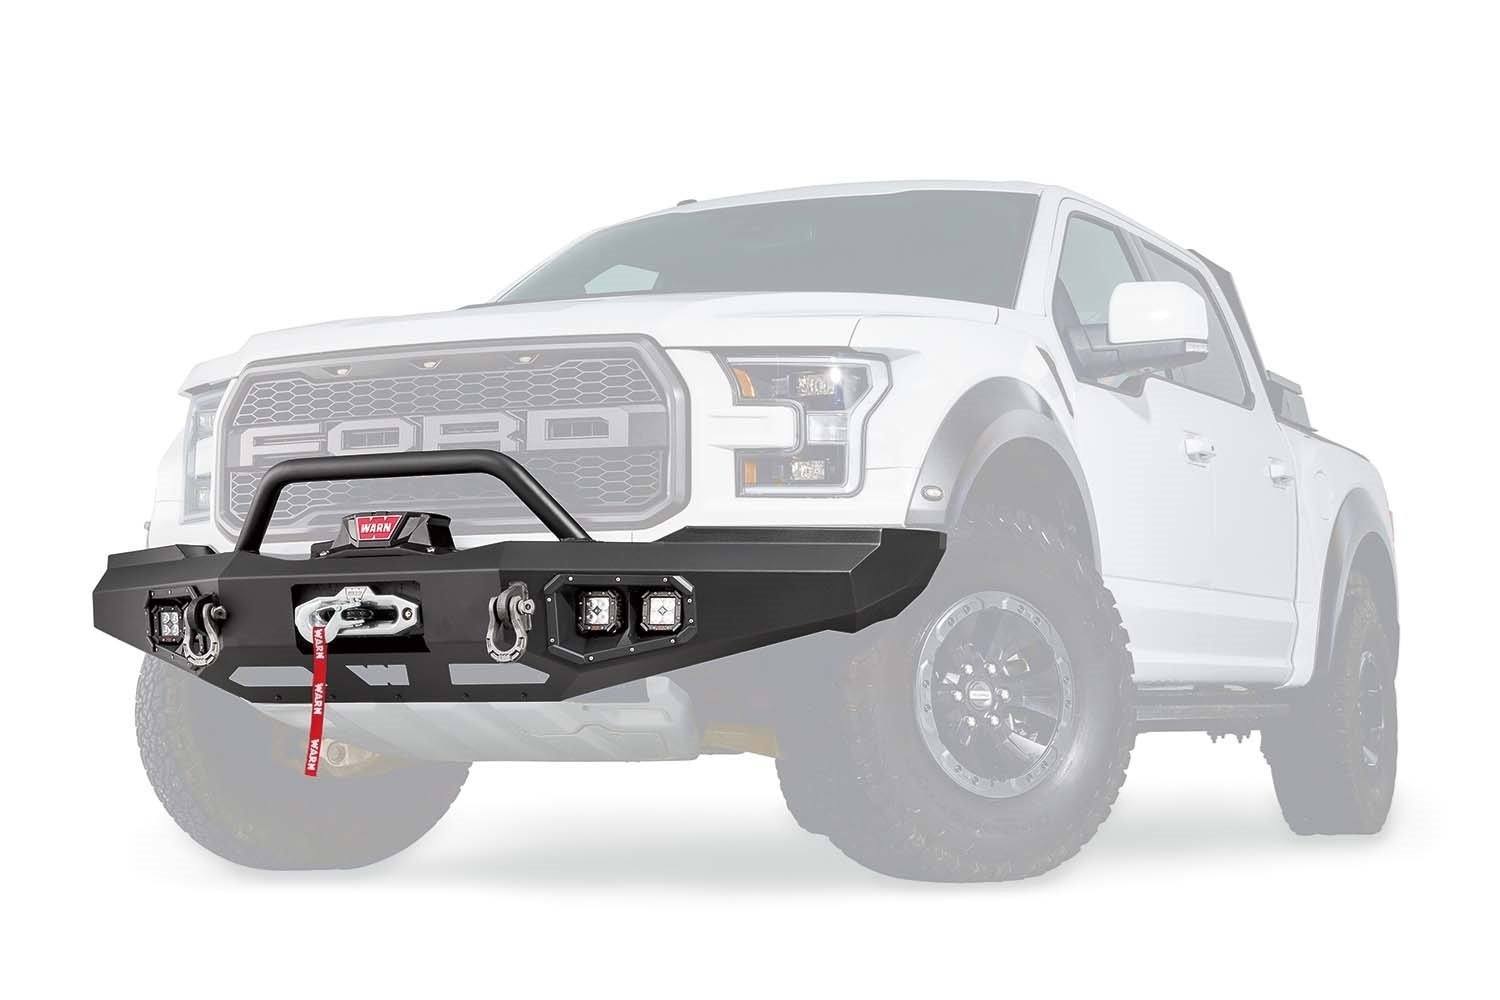 17-19 Ford Raptor Ascent Front Bumper Warn Industries display